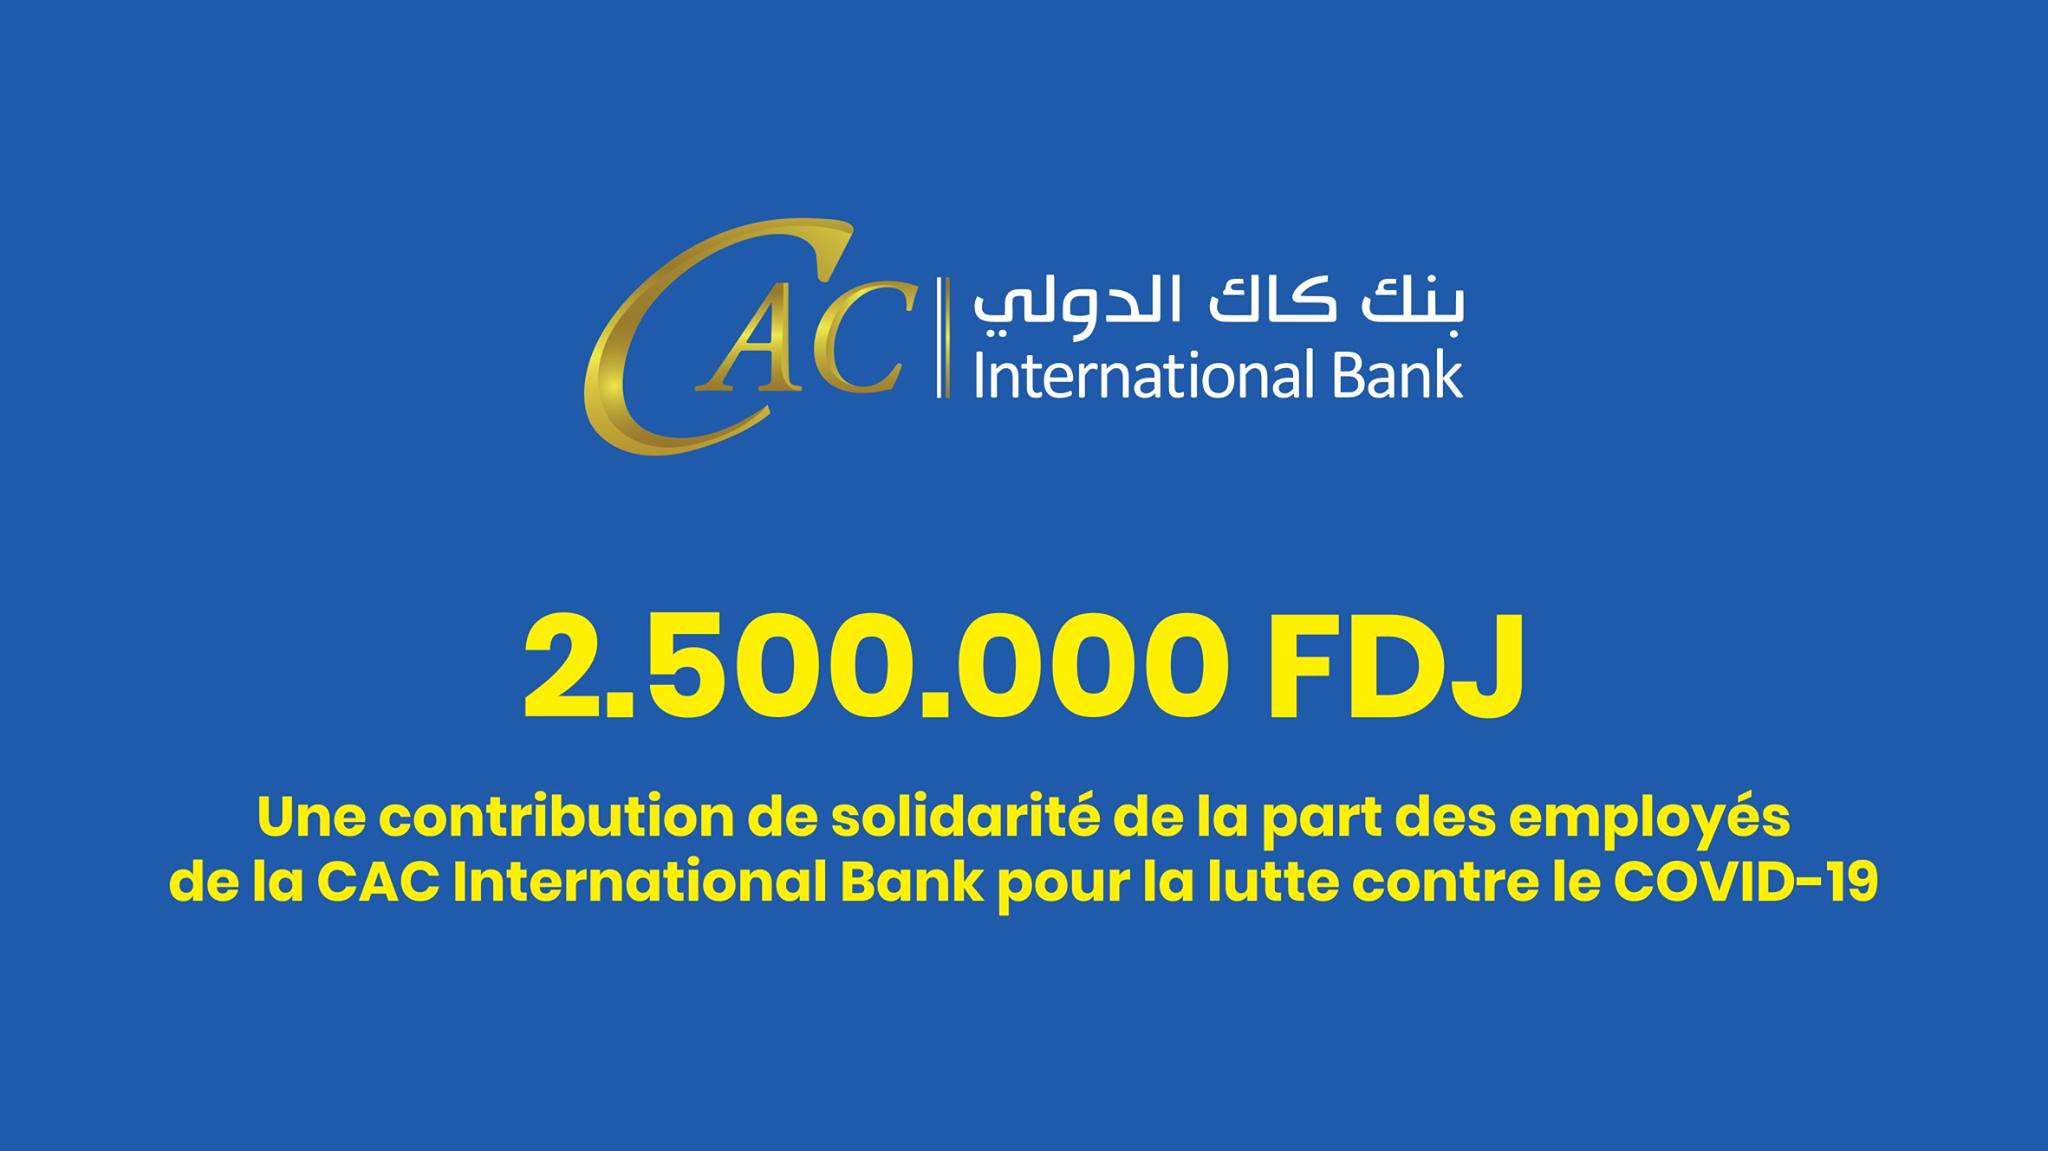 A solidarity contribution from CAC International Bank employees